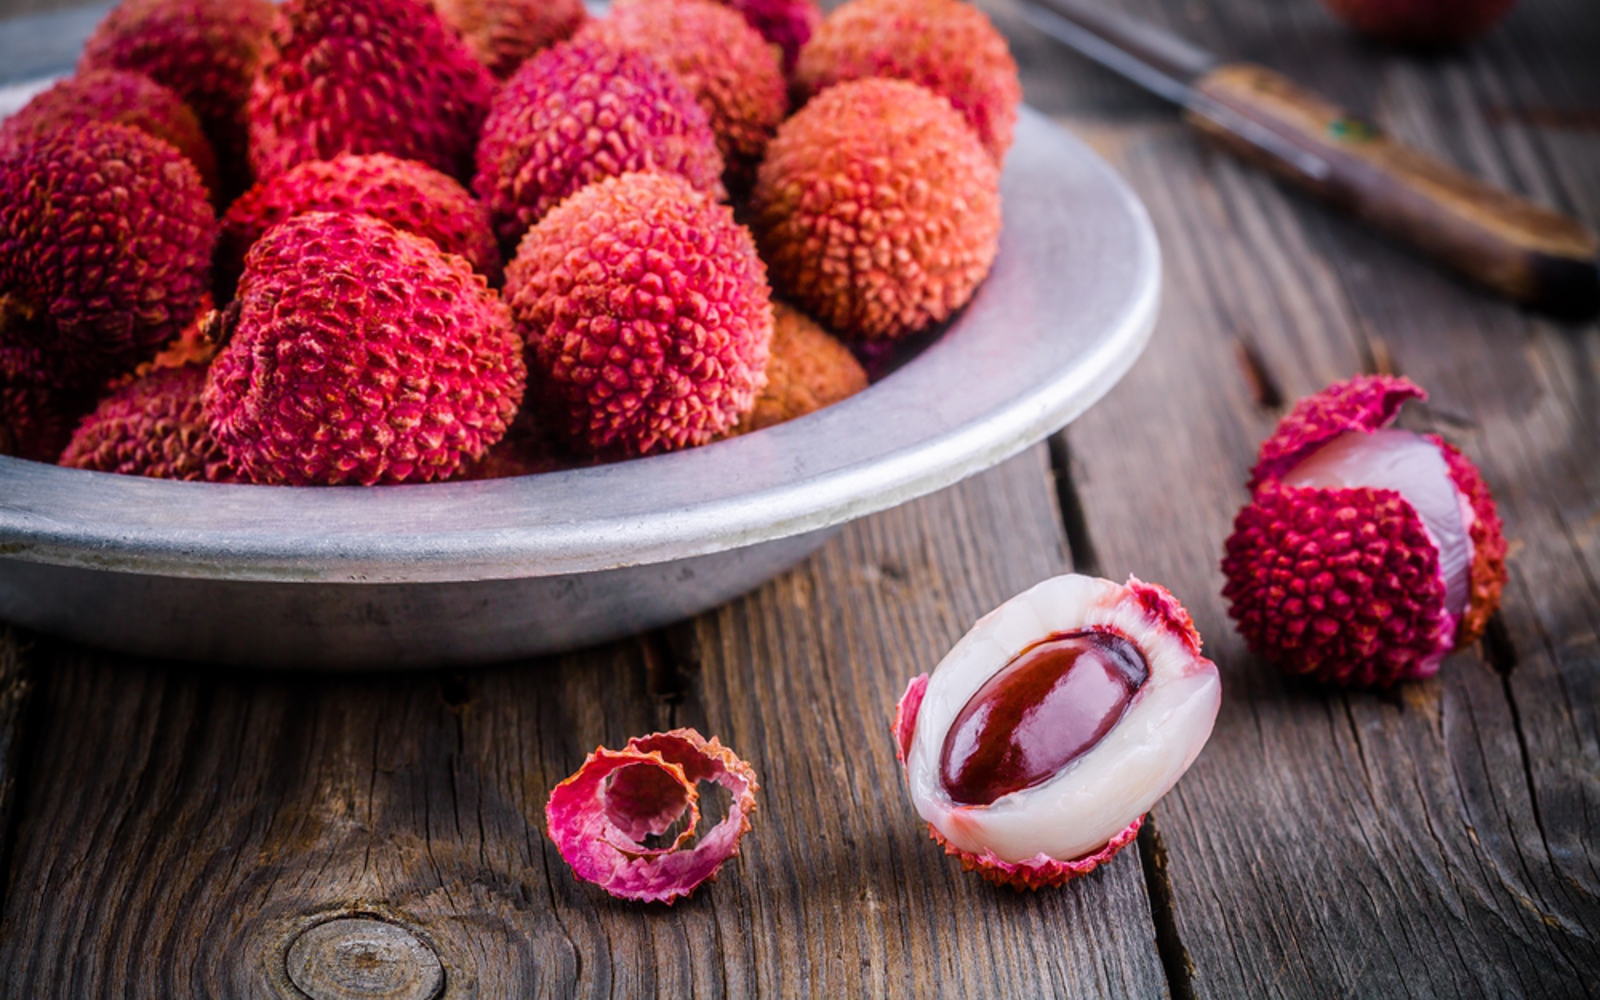 Lychee Longan And Rambutan Why You Need To Be Eating These Cool Juicy Exotic Asian Fruits This Summer One Green Planet,How To Make A Duct Tape Wallet With Credit Card Slots